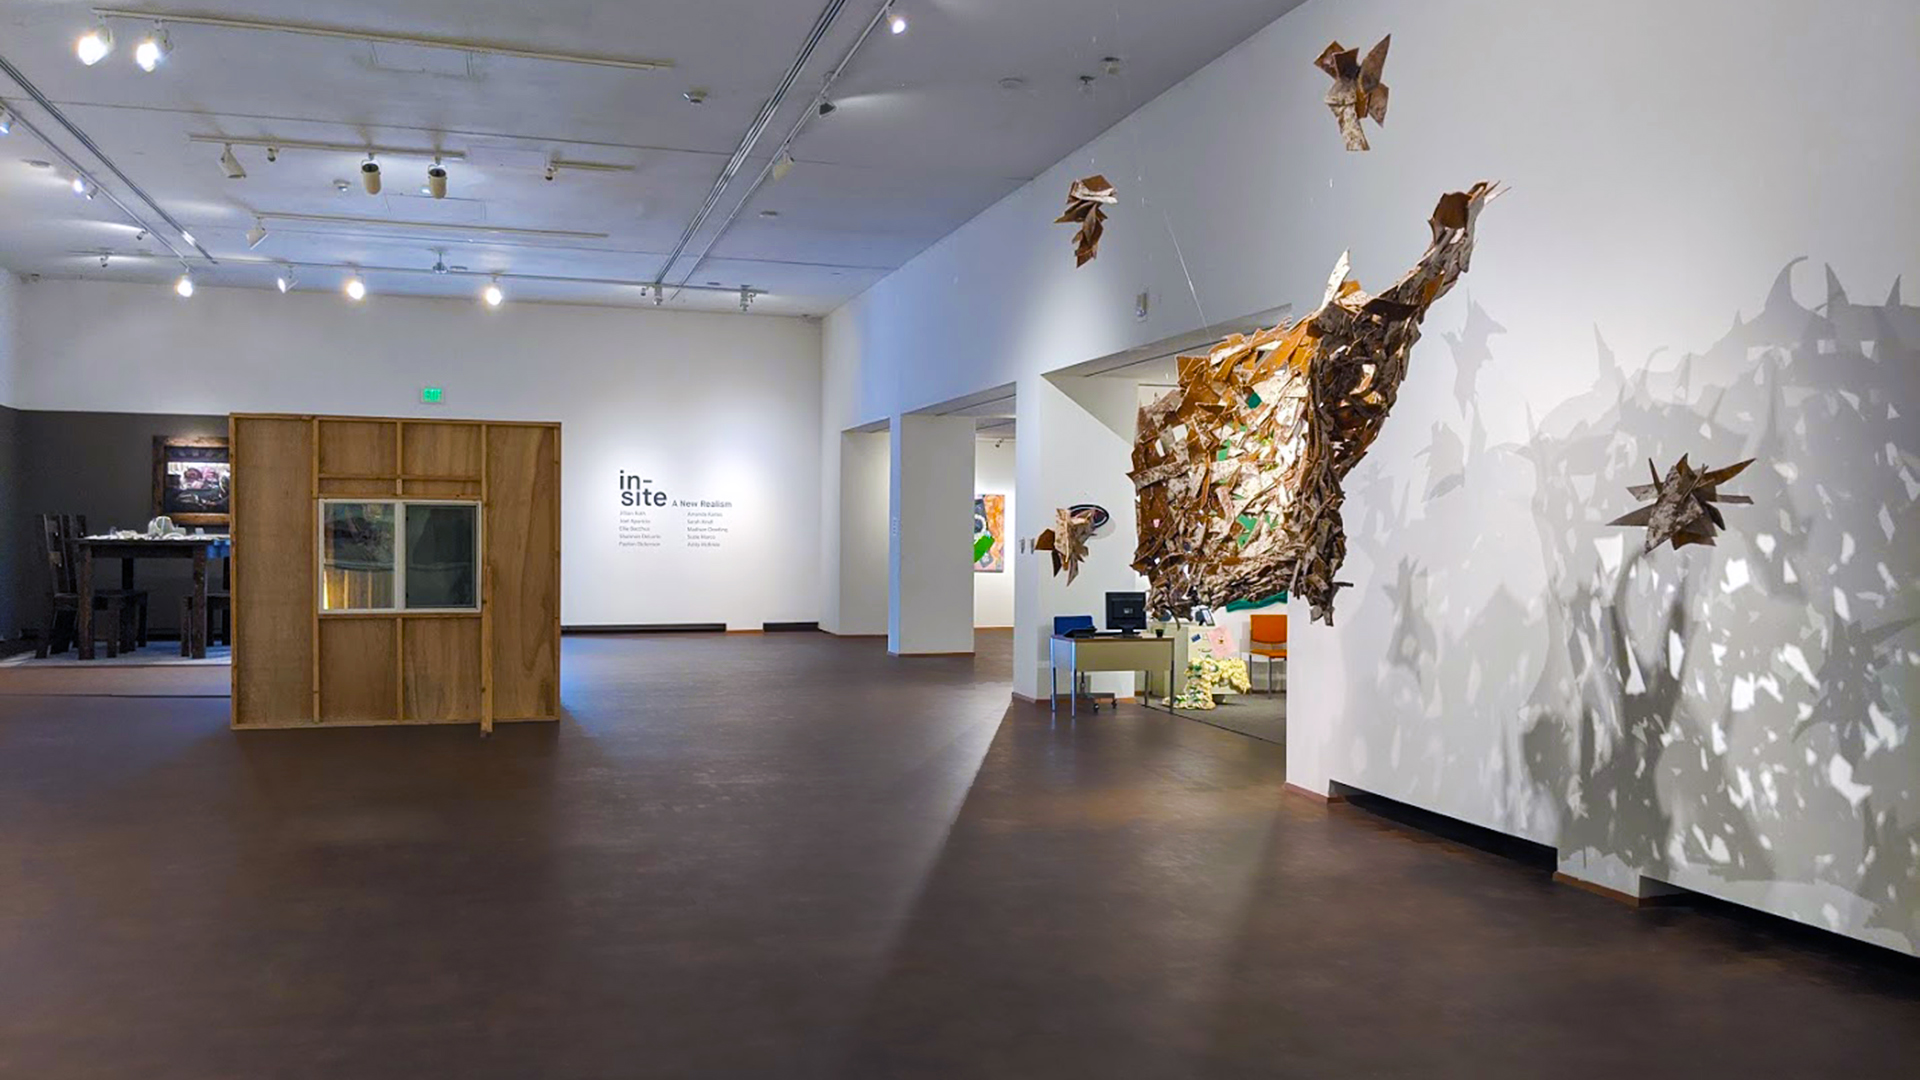 An exhibition inside the Western Gallery: To the right, an abstract 3D artwork hangs from the gallery ceiling, casting interlaced patterned shadows on the wall. To the left, an oversized dining table sits within temporary walls built to look like a room within the gallery.